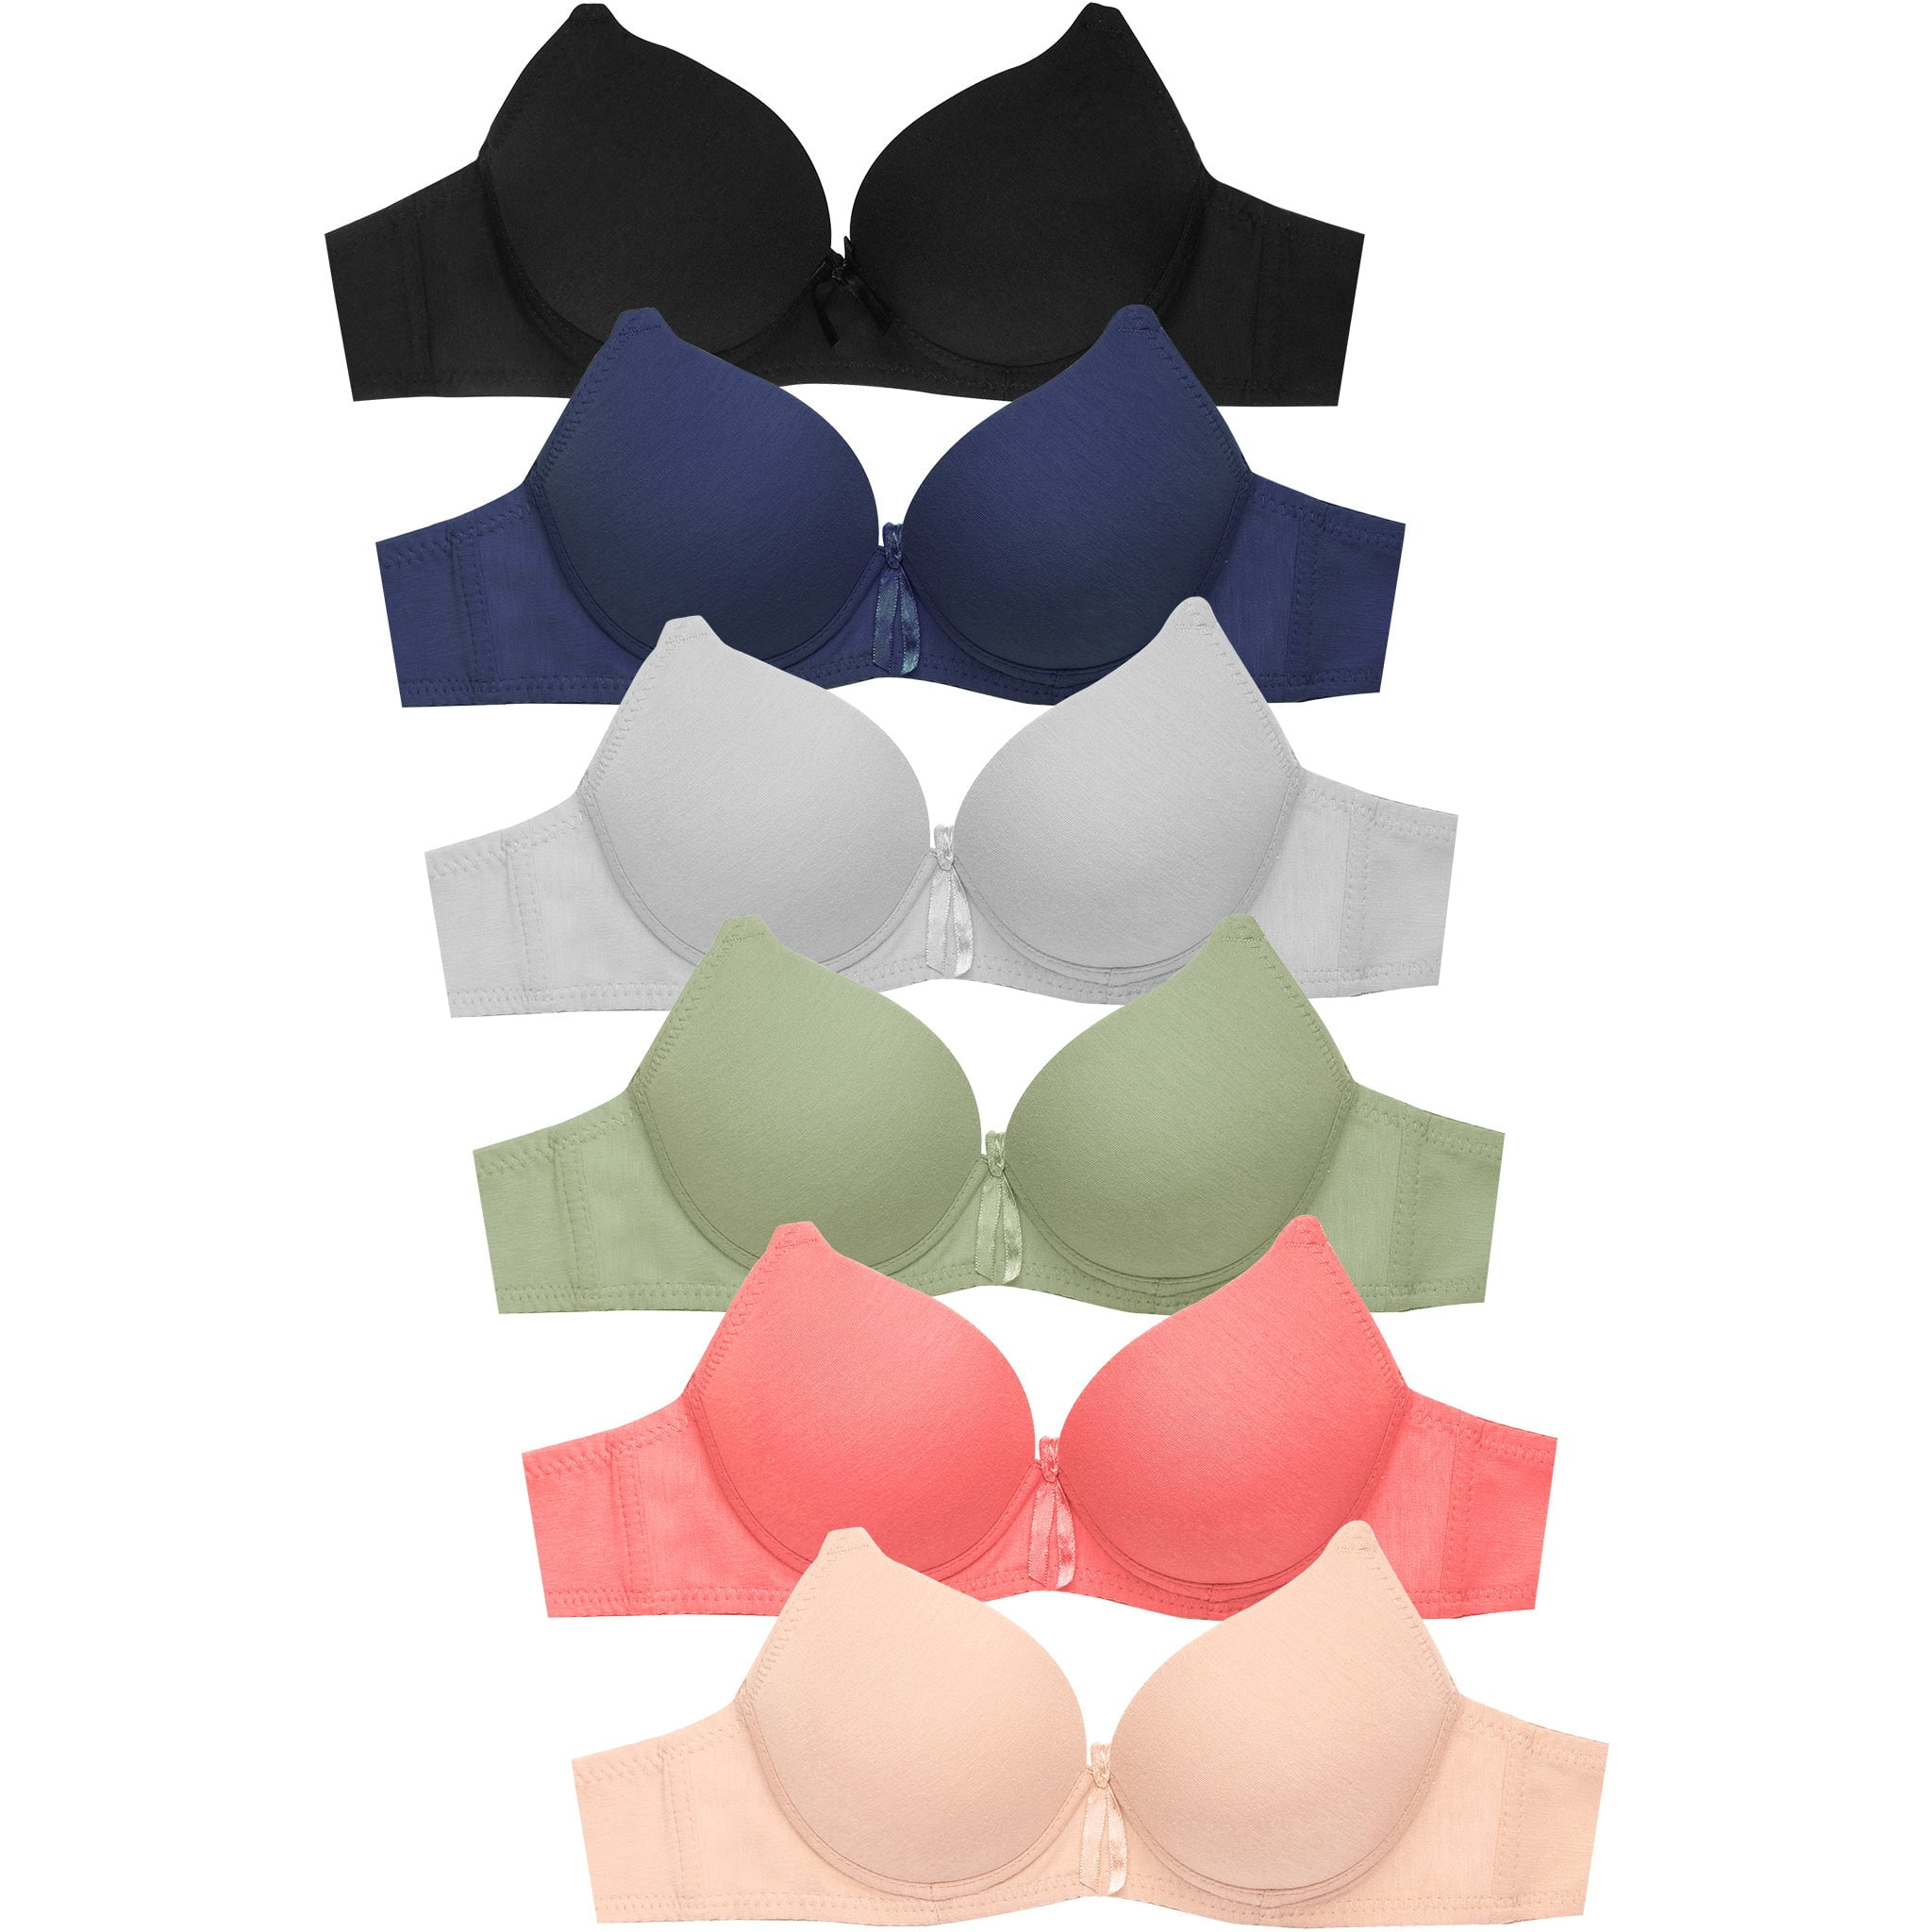 Mamia BR4208P5 - 34C Womens Solid Full Coverage Cotton Blend Bra Style  Intimate Sets, Size 34C - Pack of 6 